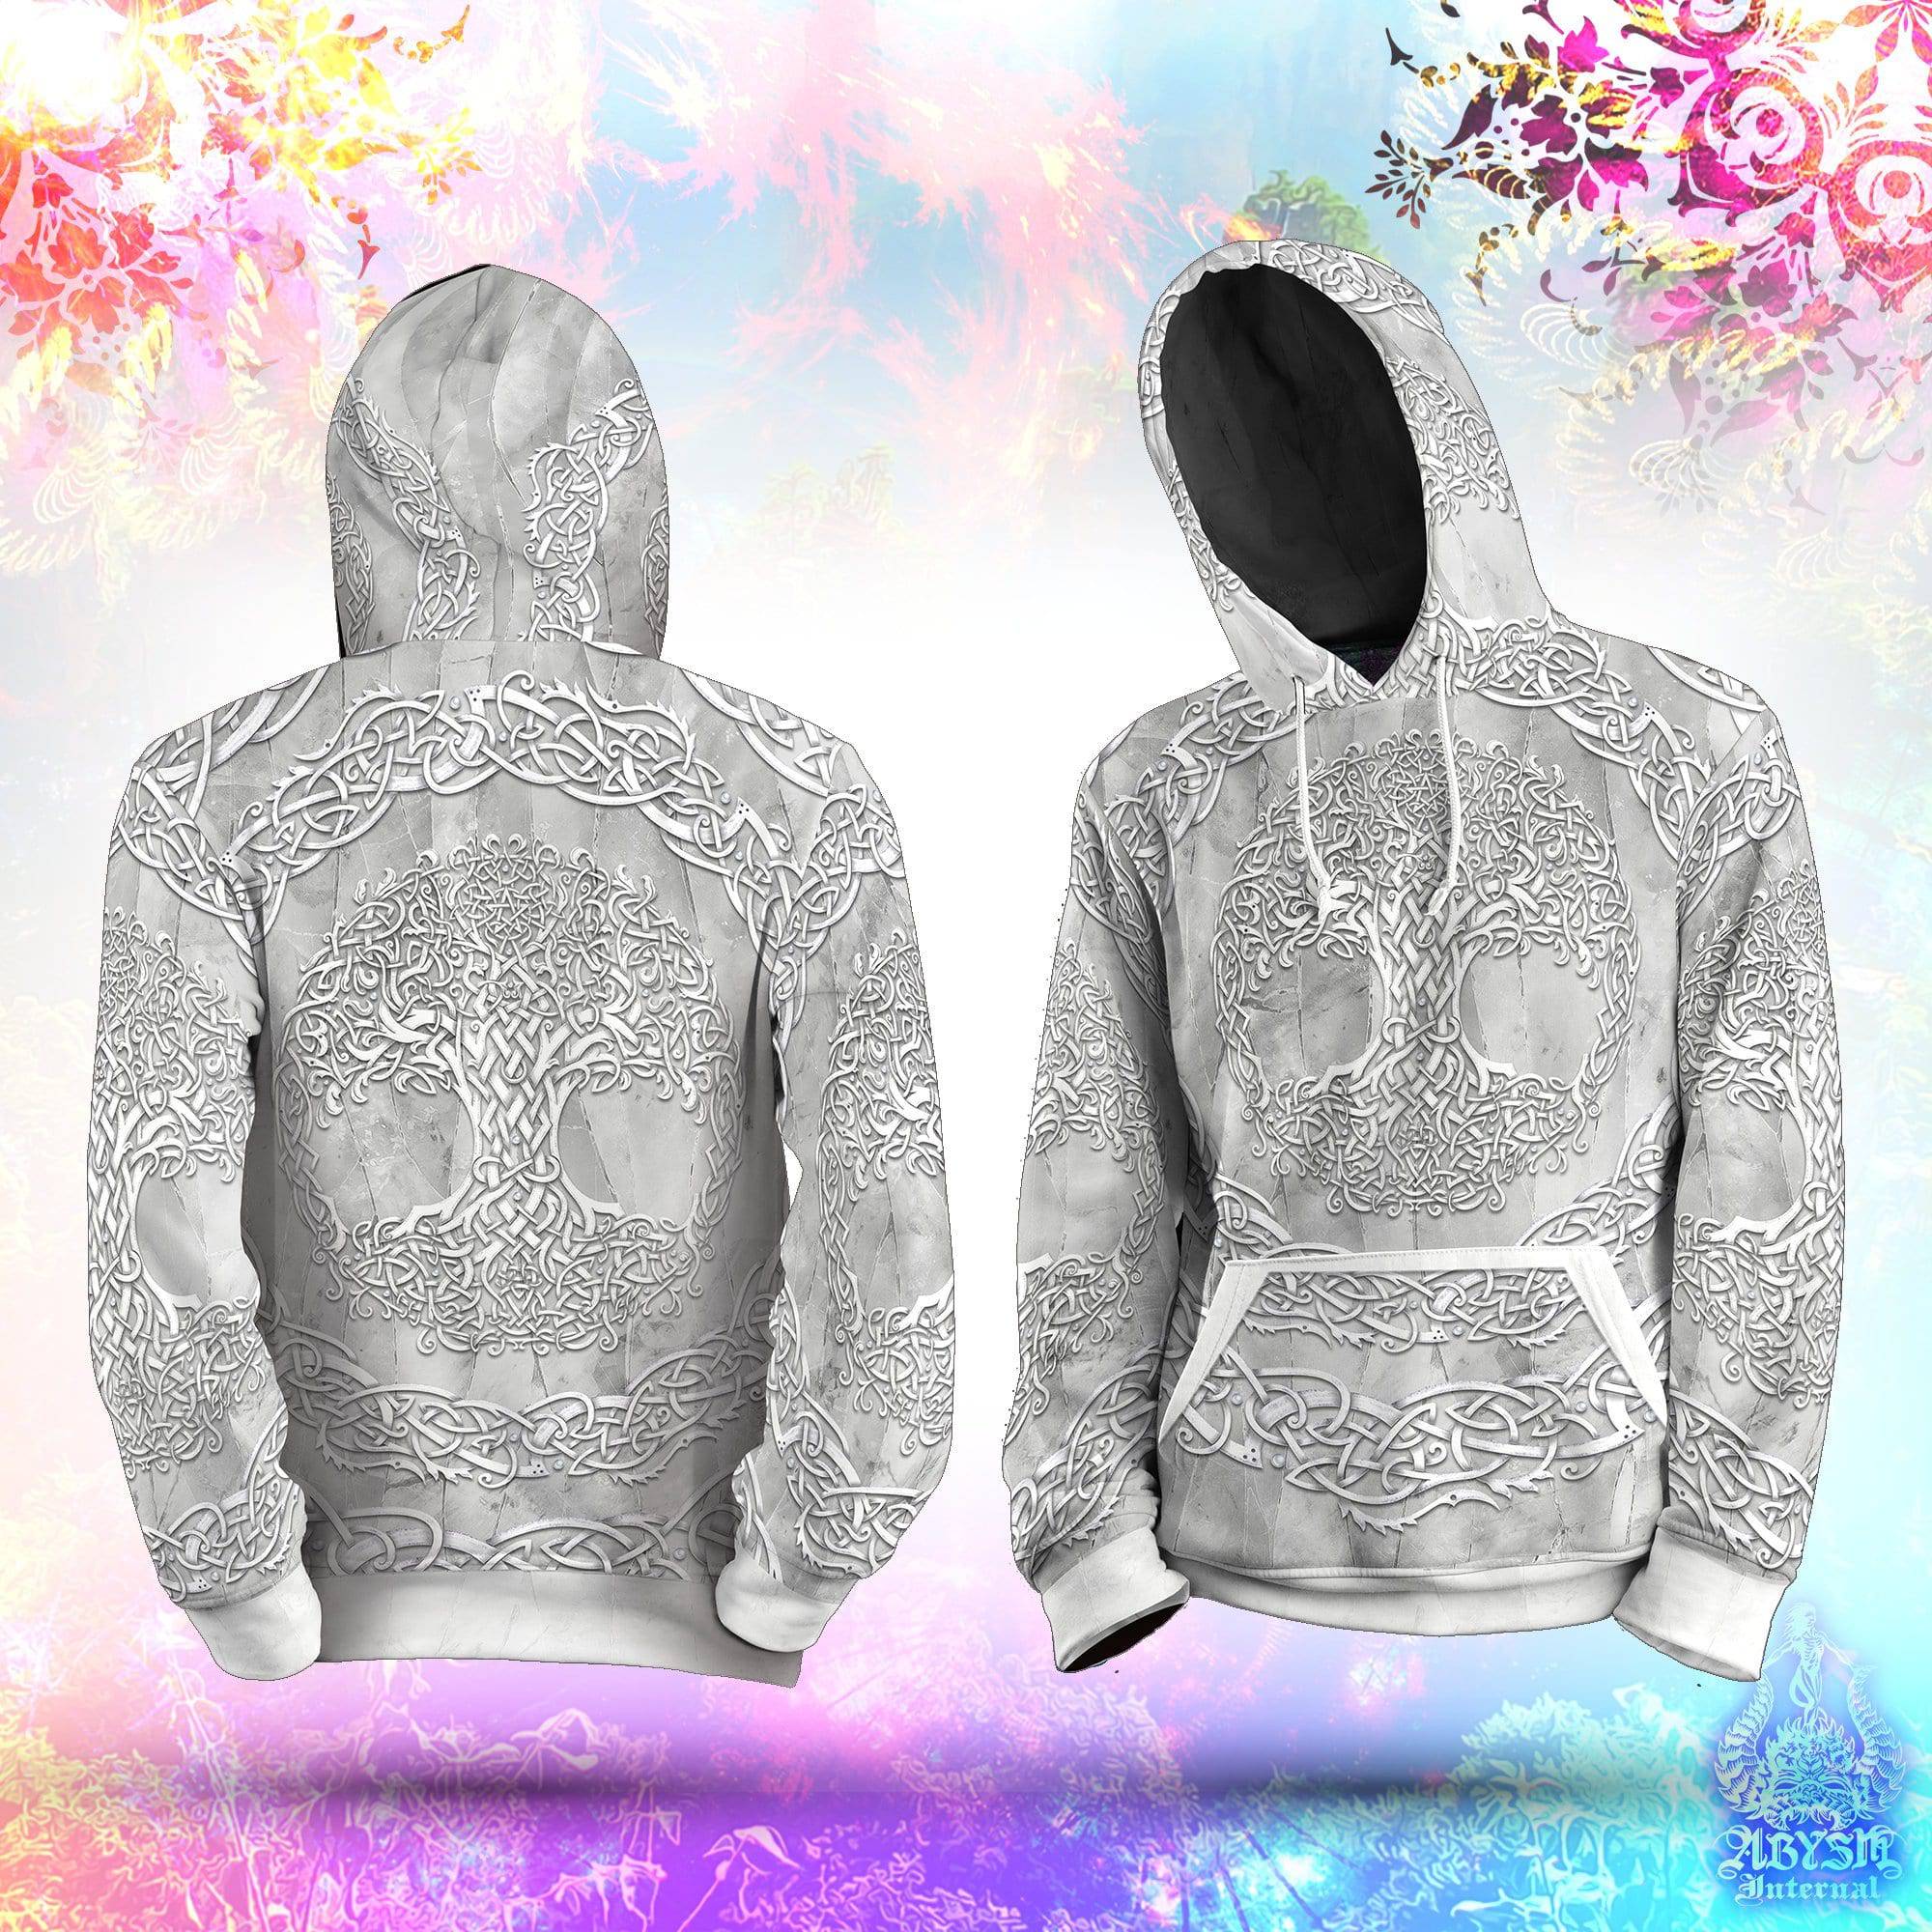 Tree of Life Hoodie, Boho Outfit, Indie Sweater, Witchy Streetwear, Alternative Clothing, Unisex - Celtic, Stone - Abysm Internal